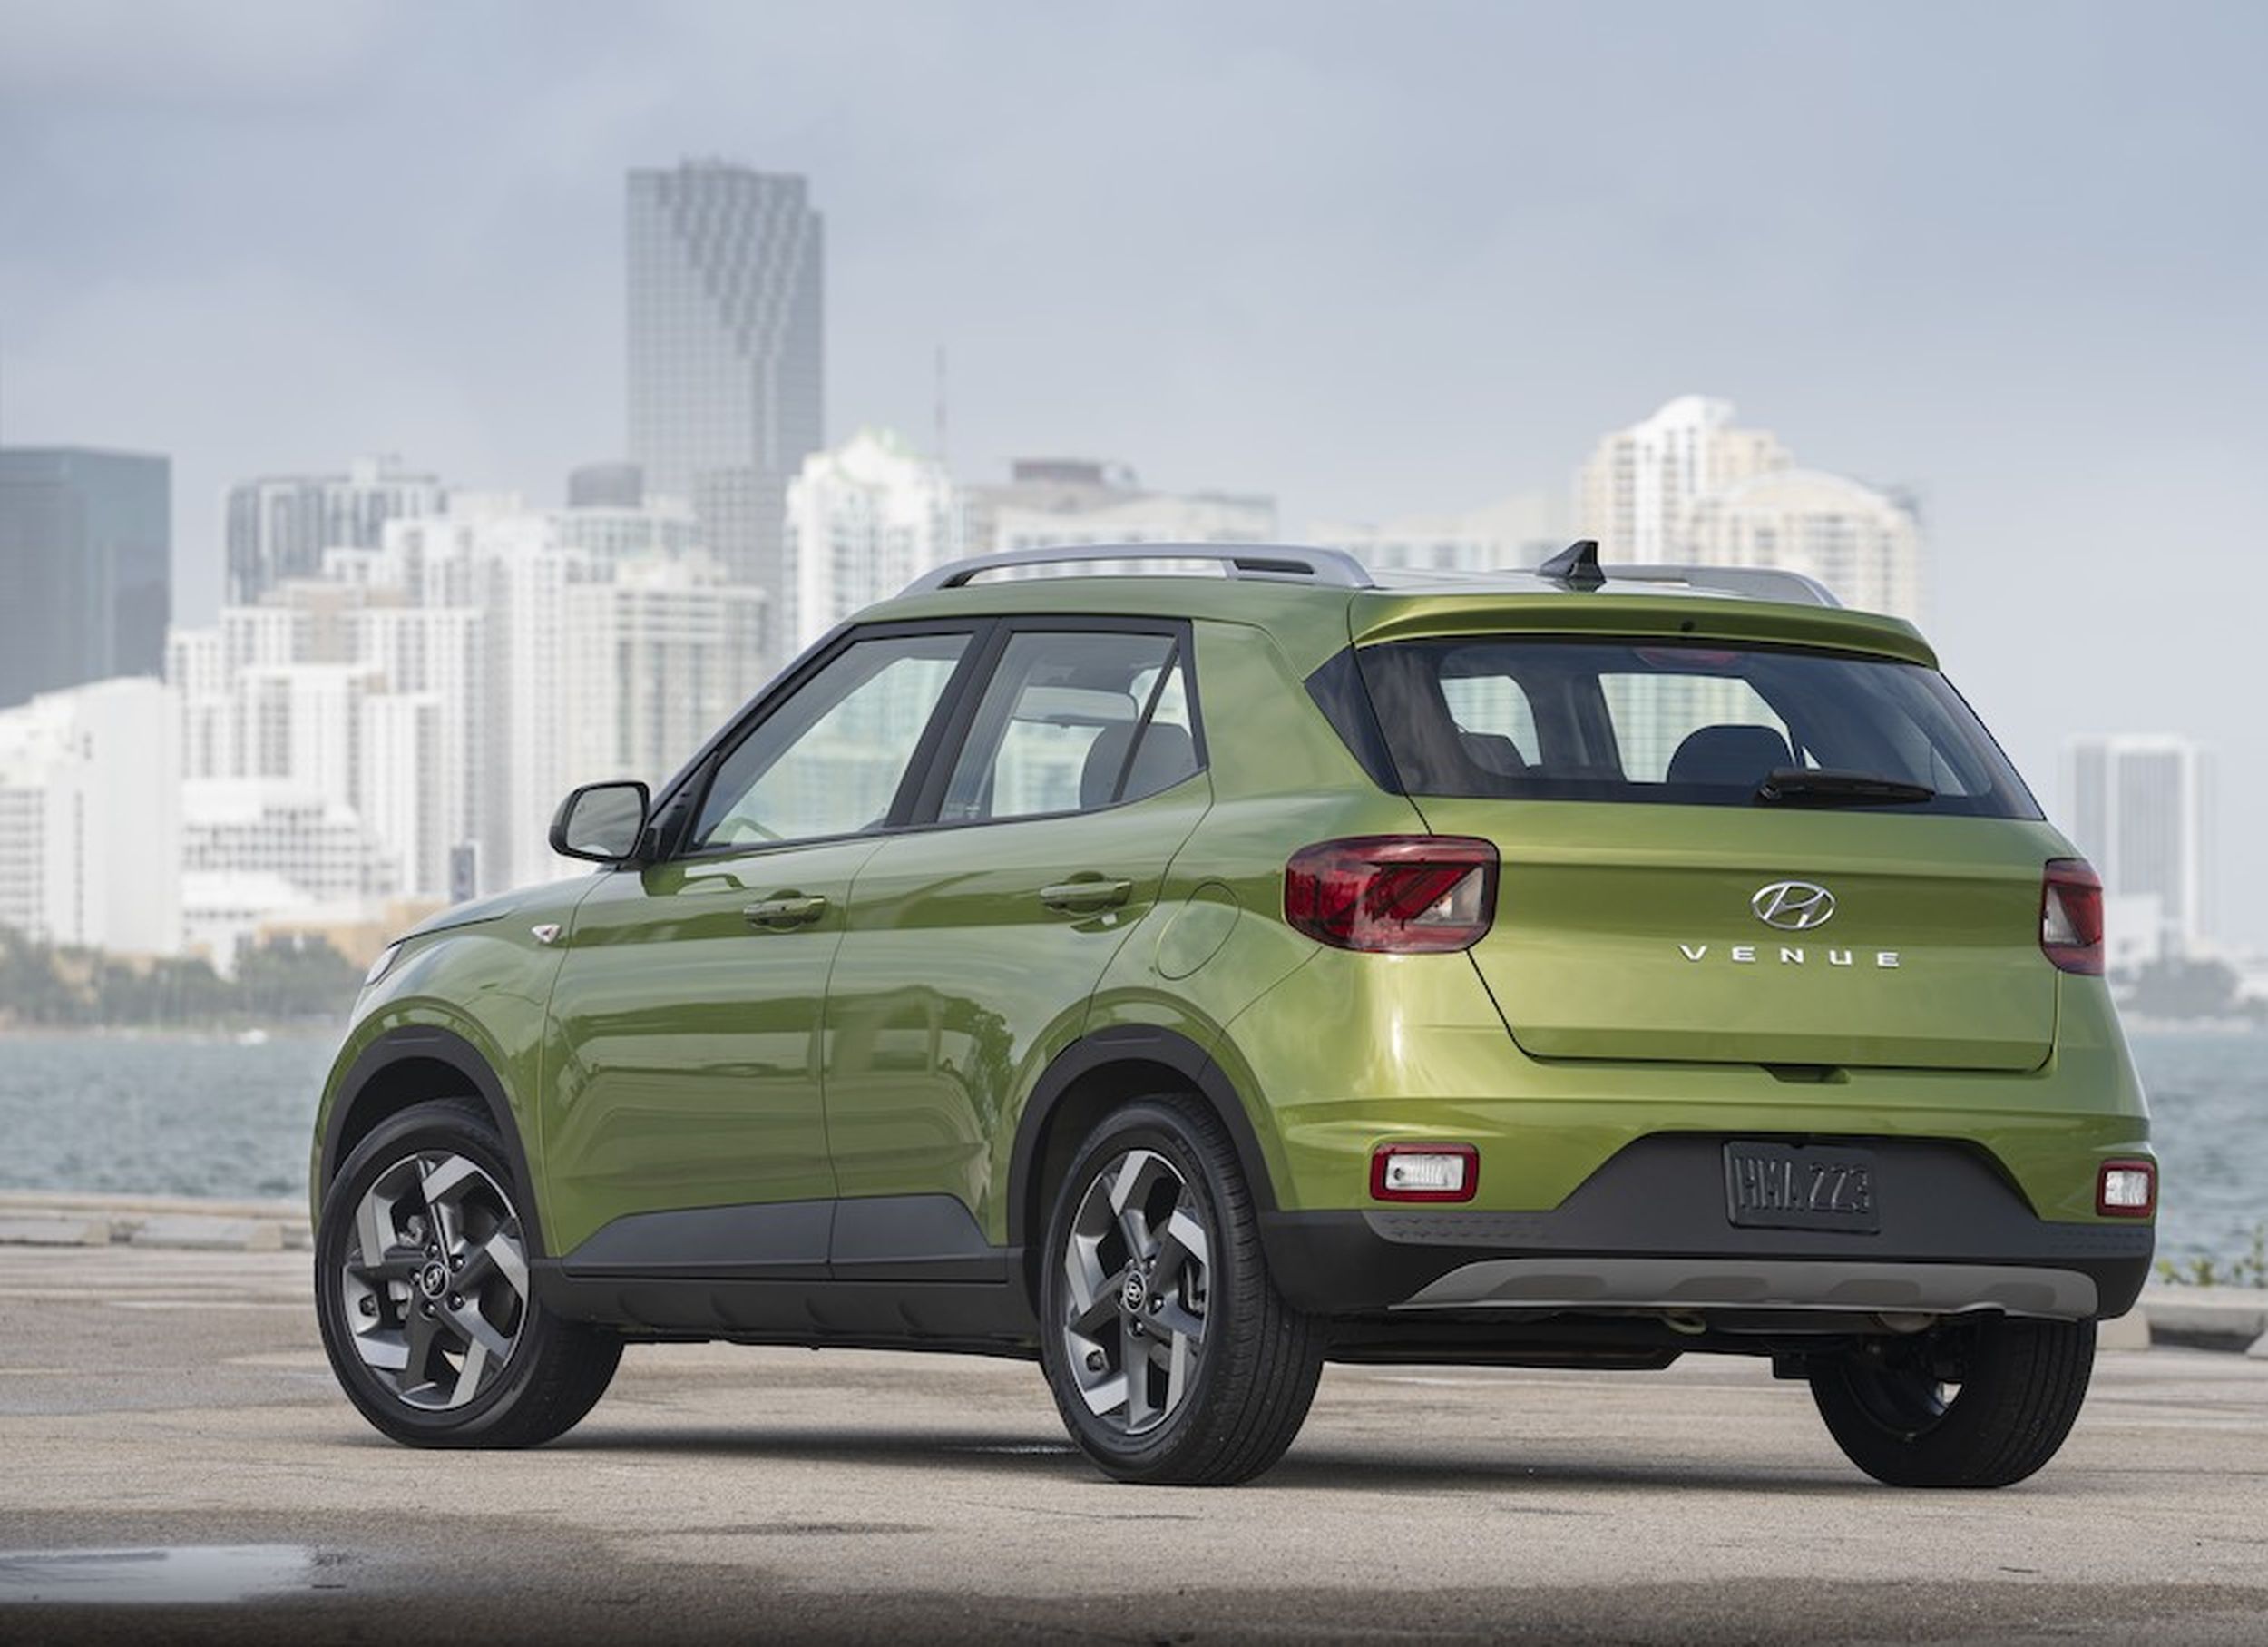 Our drivers' notes for the 2020 Hyundai Venue subcompact crossover